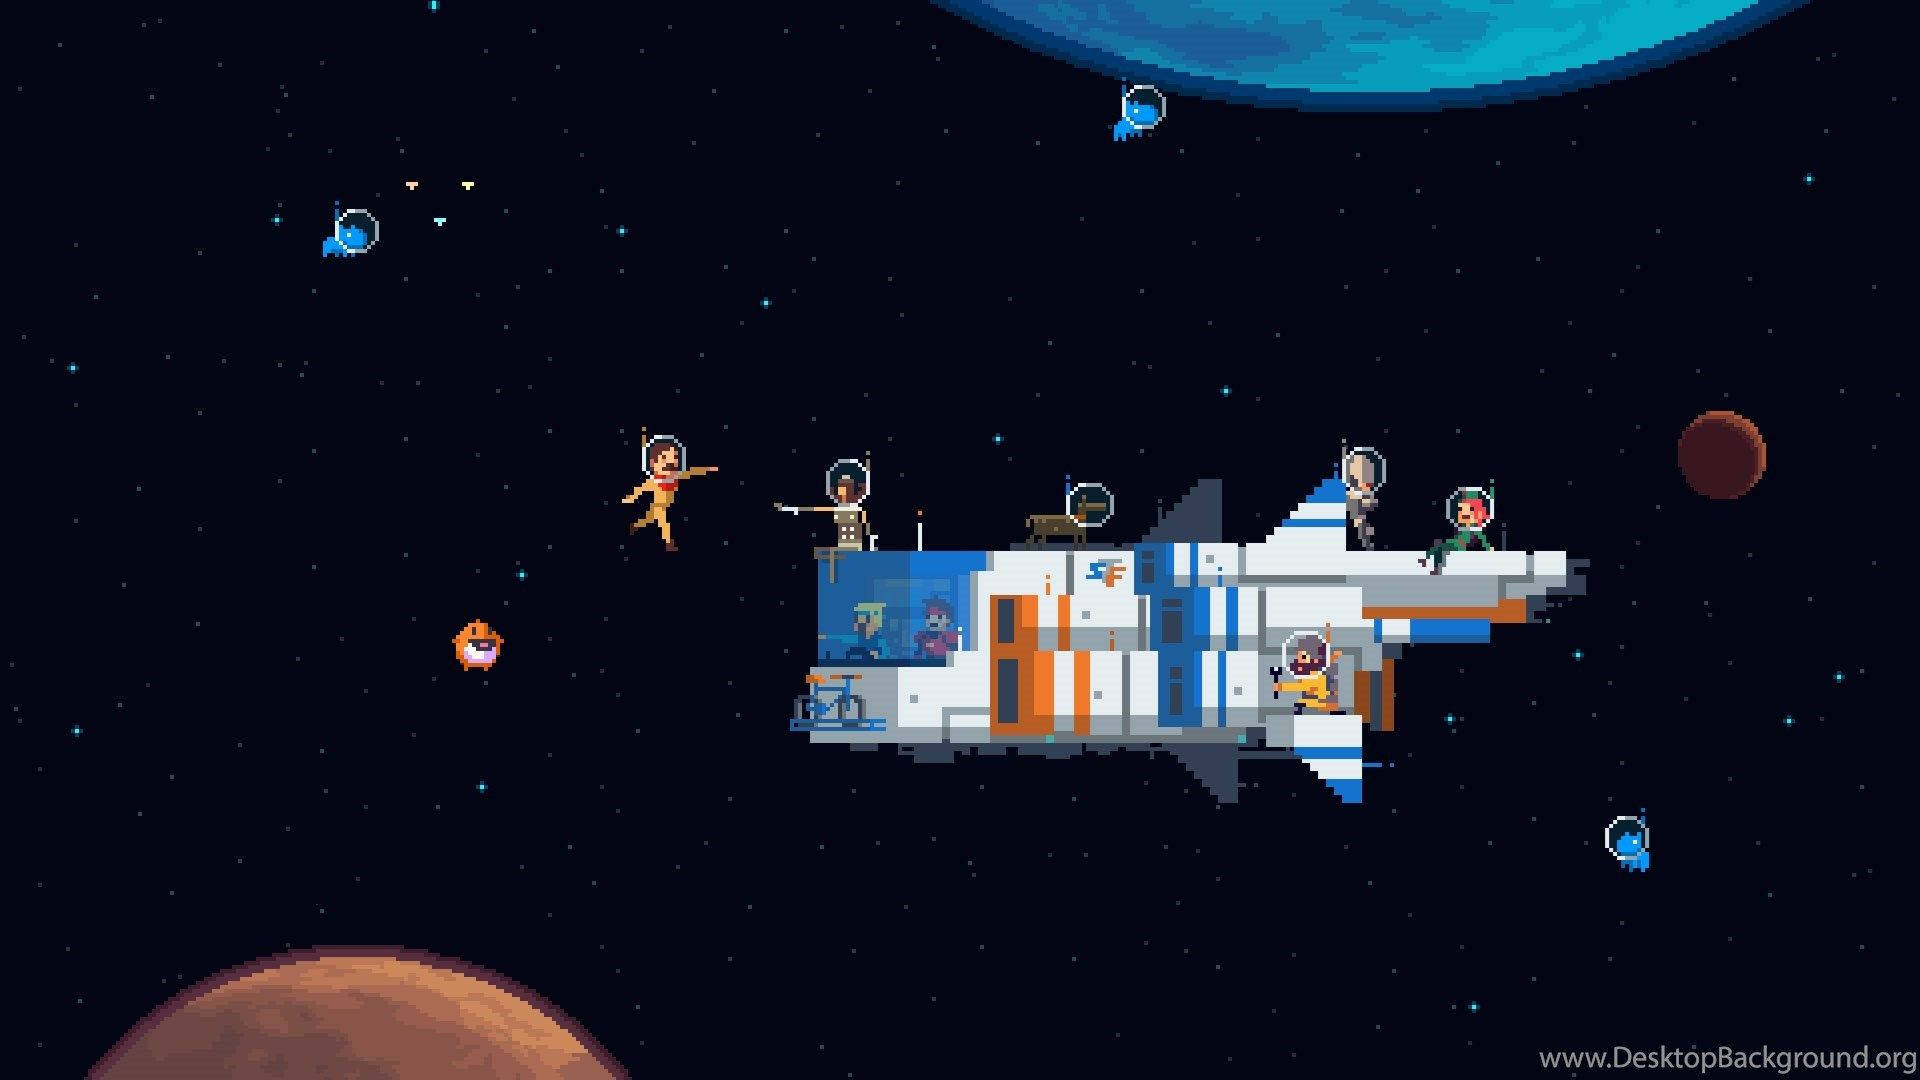 Pixel Art Spaceship In Outer Space Wallpaper